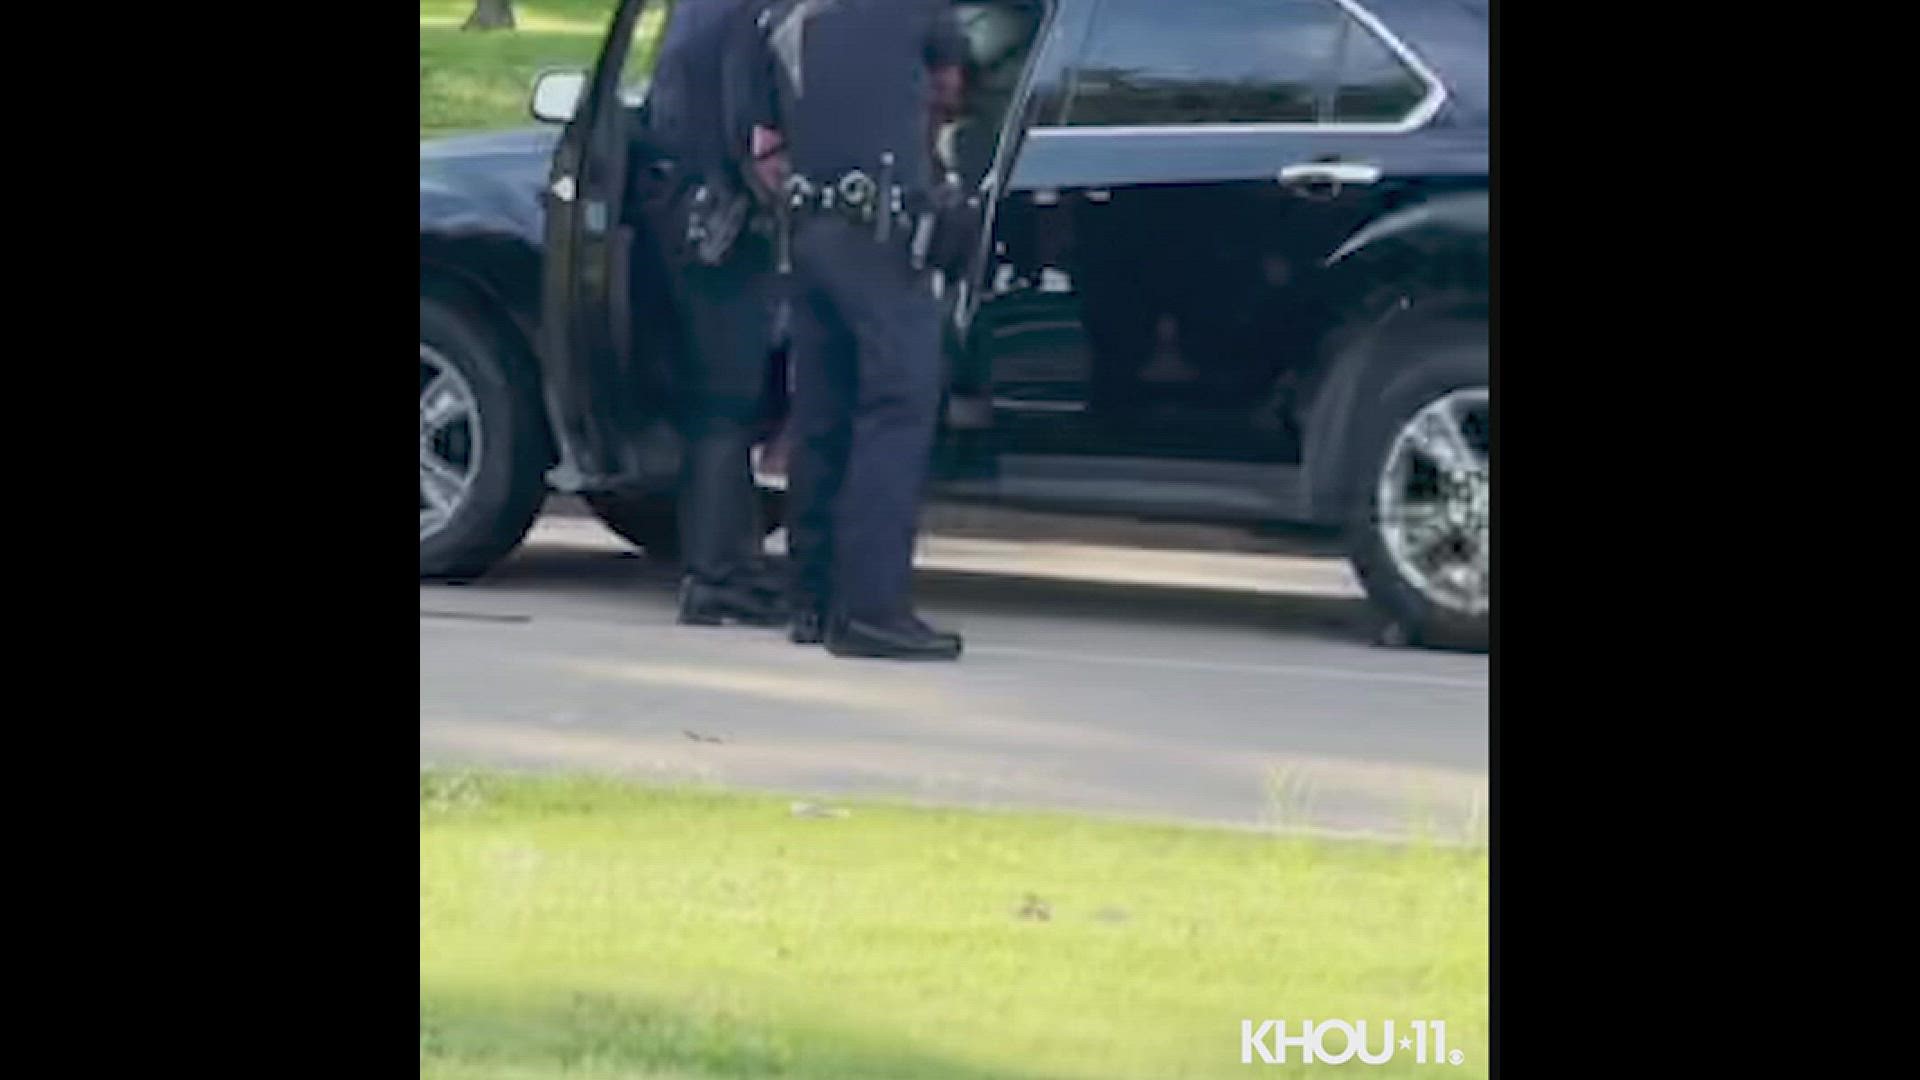 Video shows the Wednesday morning arrest of Johneisha Lewis in Pearland.